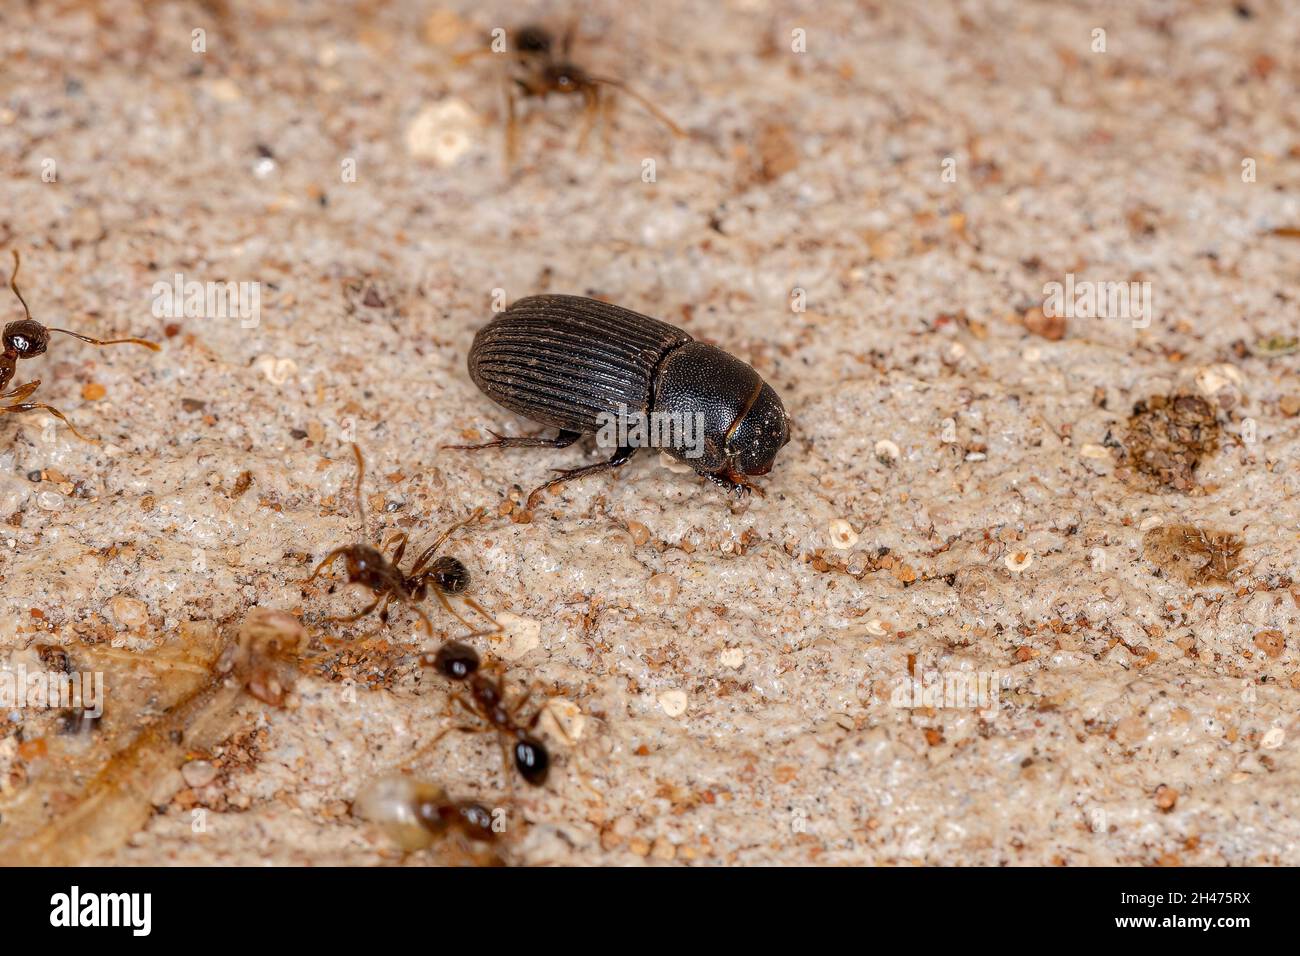 Adult Small Dung Beetle of the Subfamily Aphodiinae Stock Photo